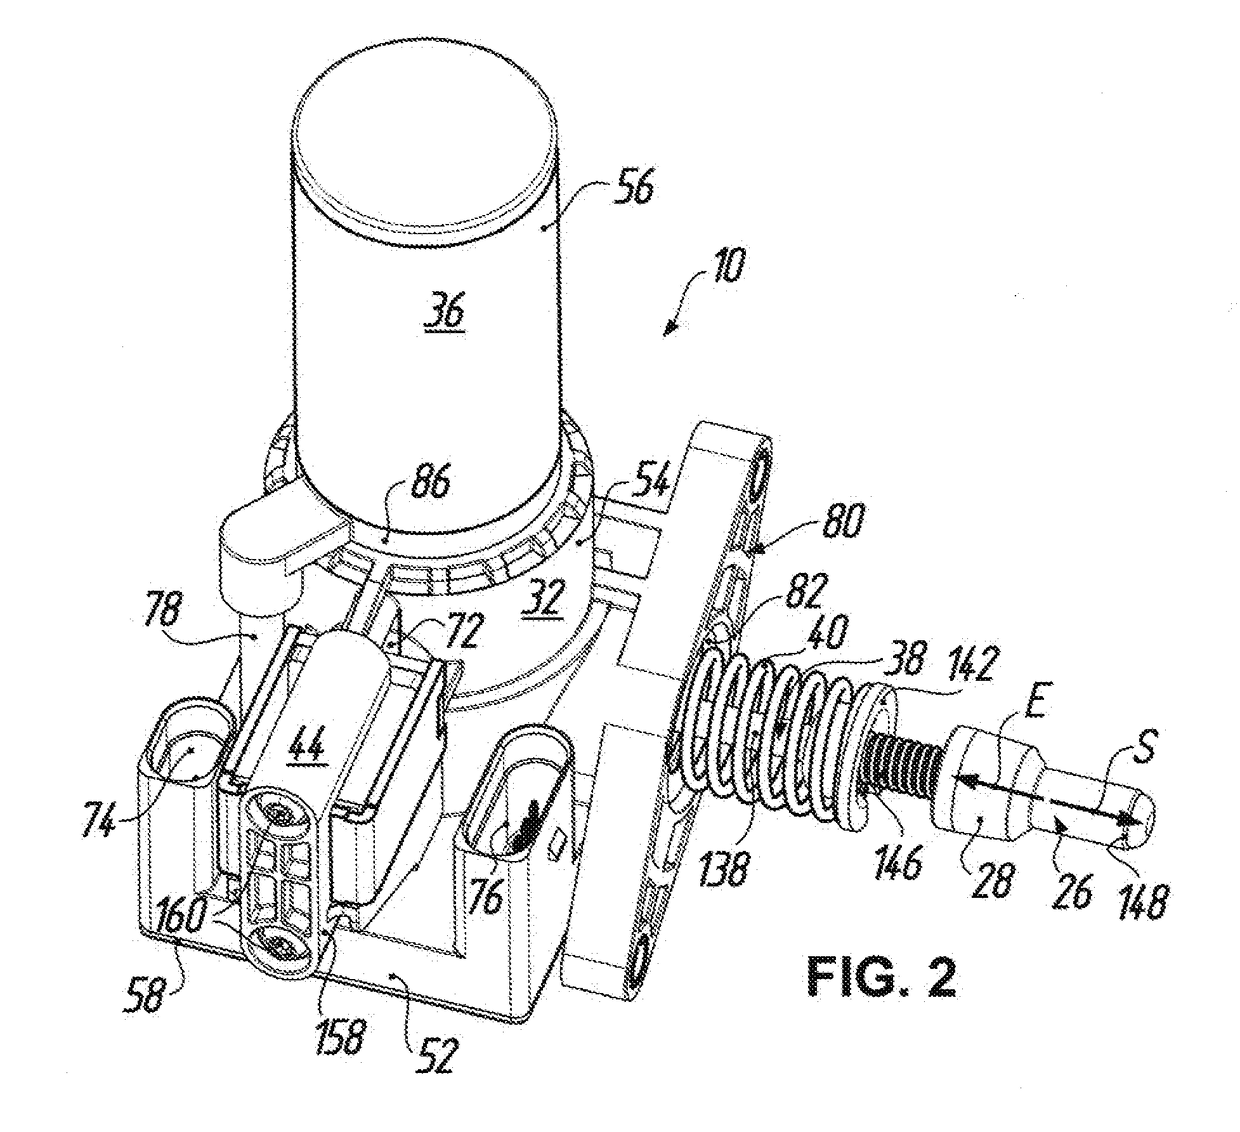 Electric parking brake actuator for actuation of a parking brake in a motor vehicle